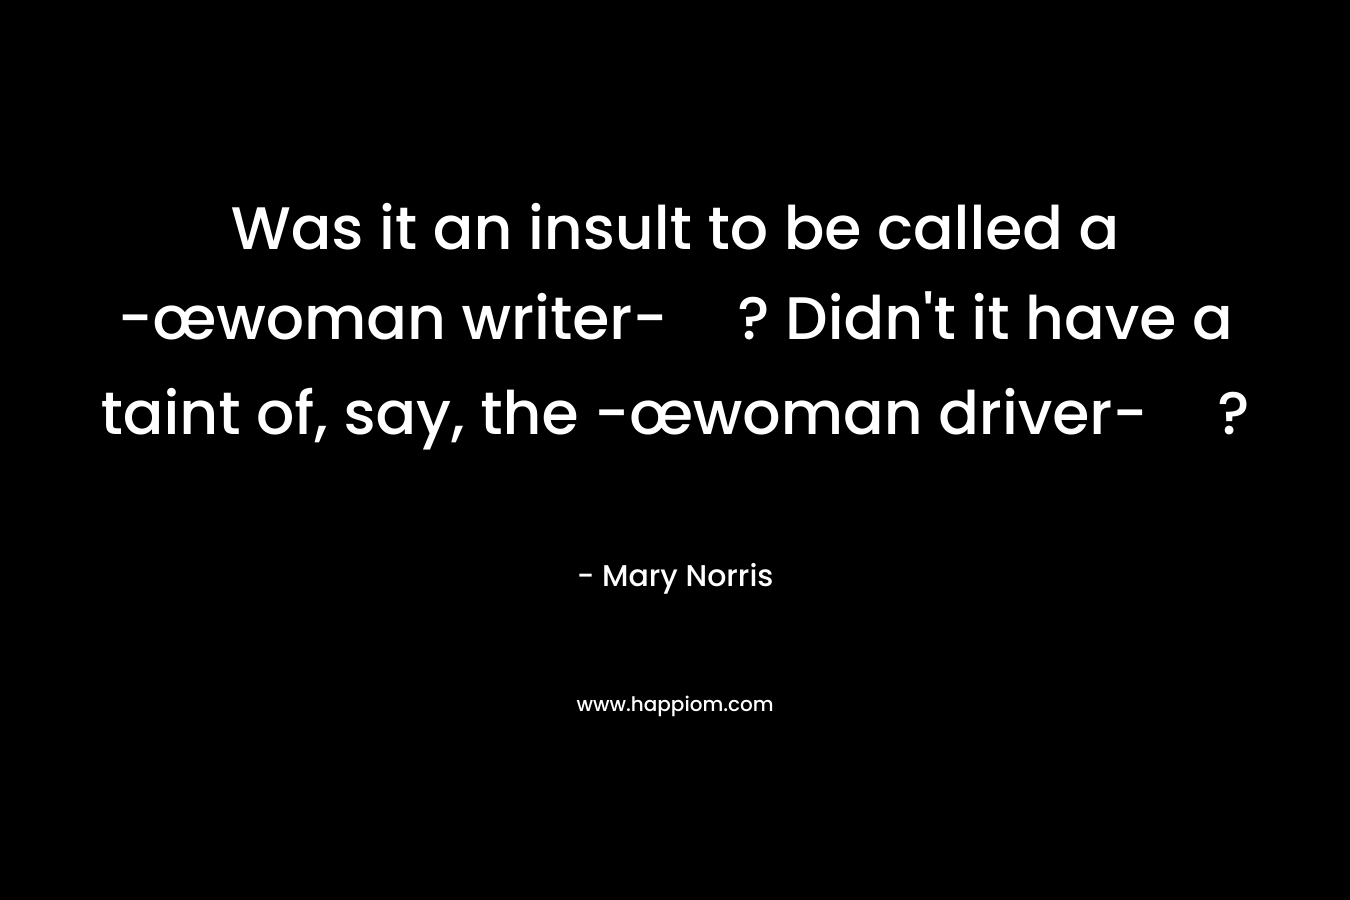 Was it an insult to be called a -œwoman writer-? Didn’t it have a taint of, say, the -œwoman driver-? – Mary Norris